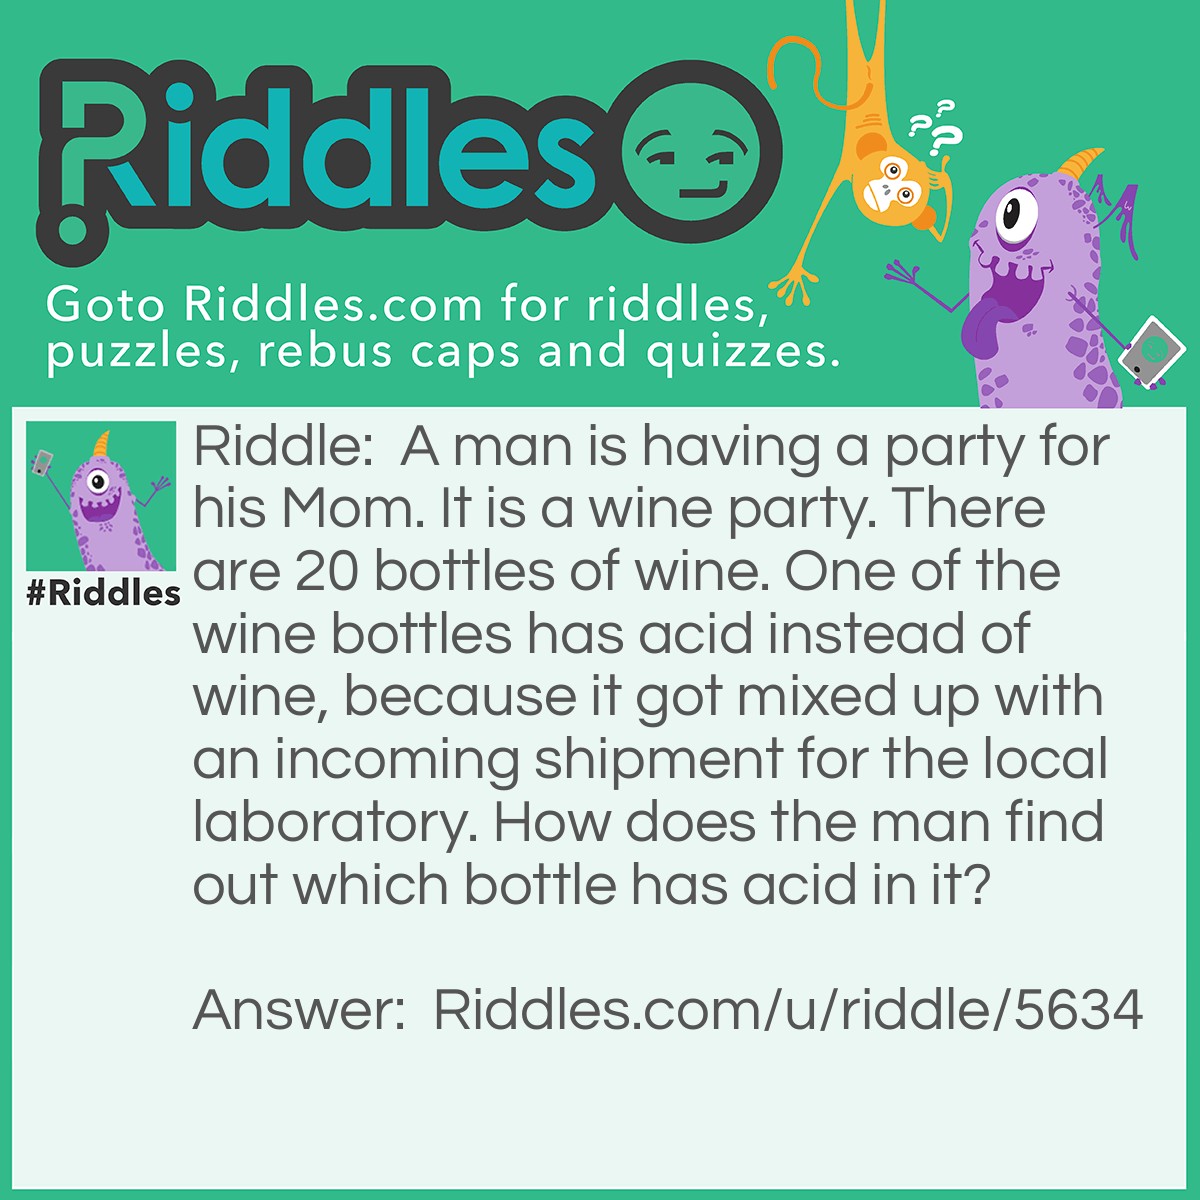 Riddle: A man is having a party for his Mom. It is a wine party. There are 20 bottles of wine. One of the wine bottles has acid instead of wine, because it got mixed up with an incoming shipment for the local laboratory. How does the man find out which bottle has acid in it? Answer: He pours wine from each of the 20 bottles in to styrofoam cups and labels the bottles and the cups 1-20. Whatever cup melts first you find the corresponding number, and you throw both out.